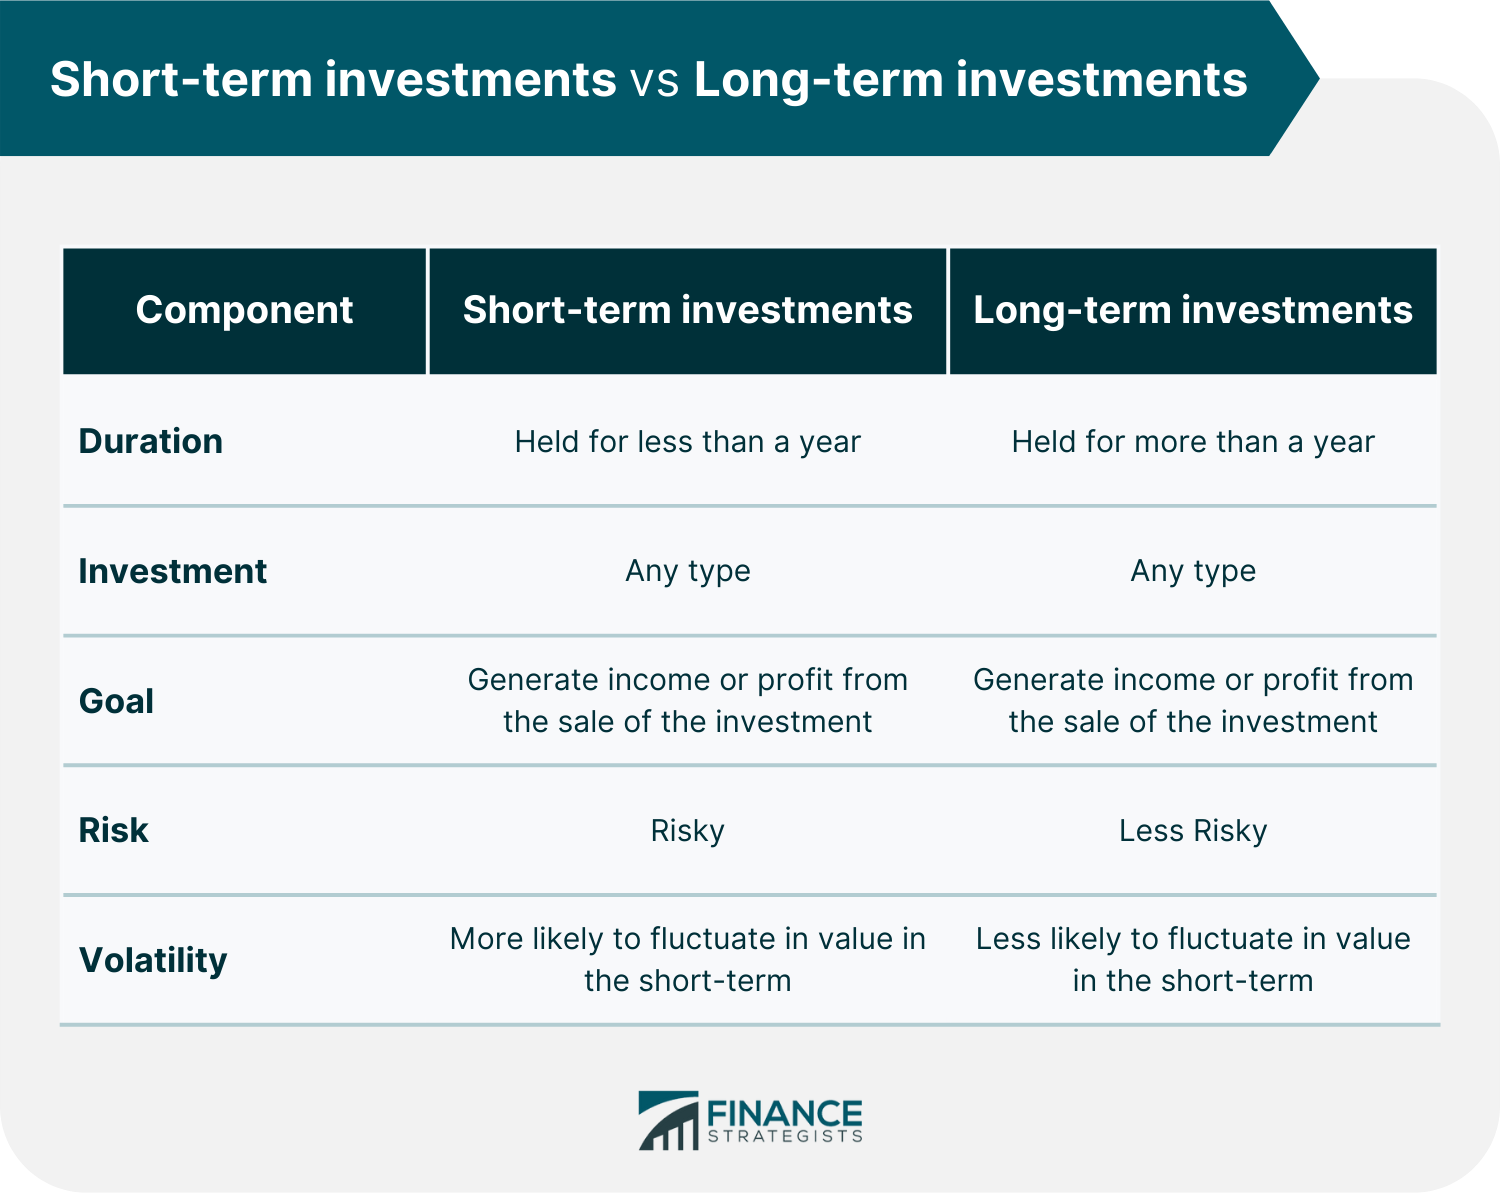 Short-term investments vs Long-term investments